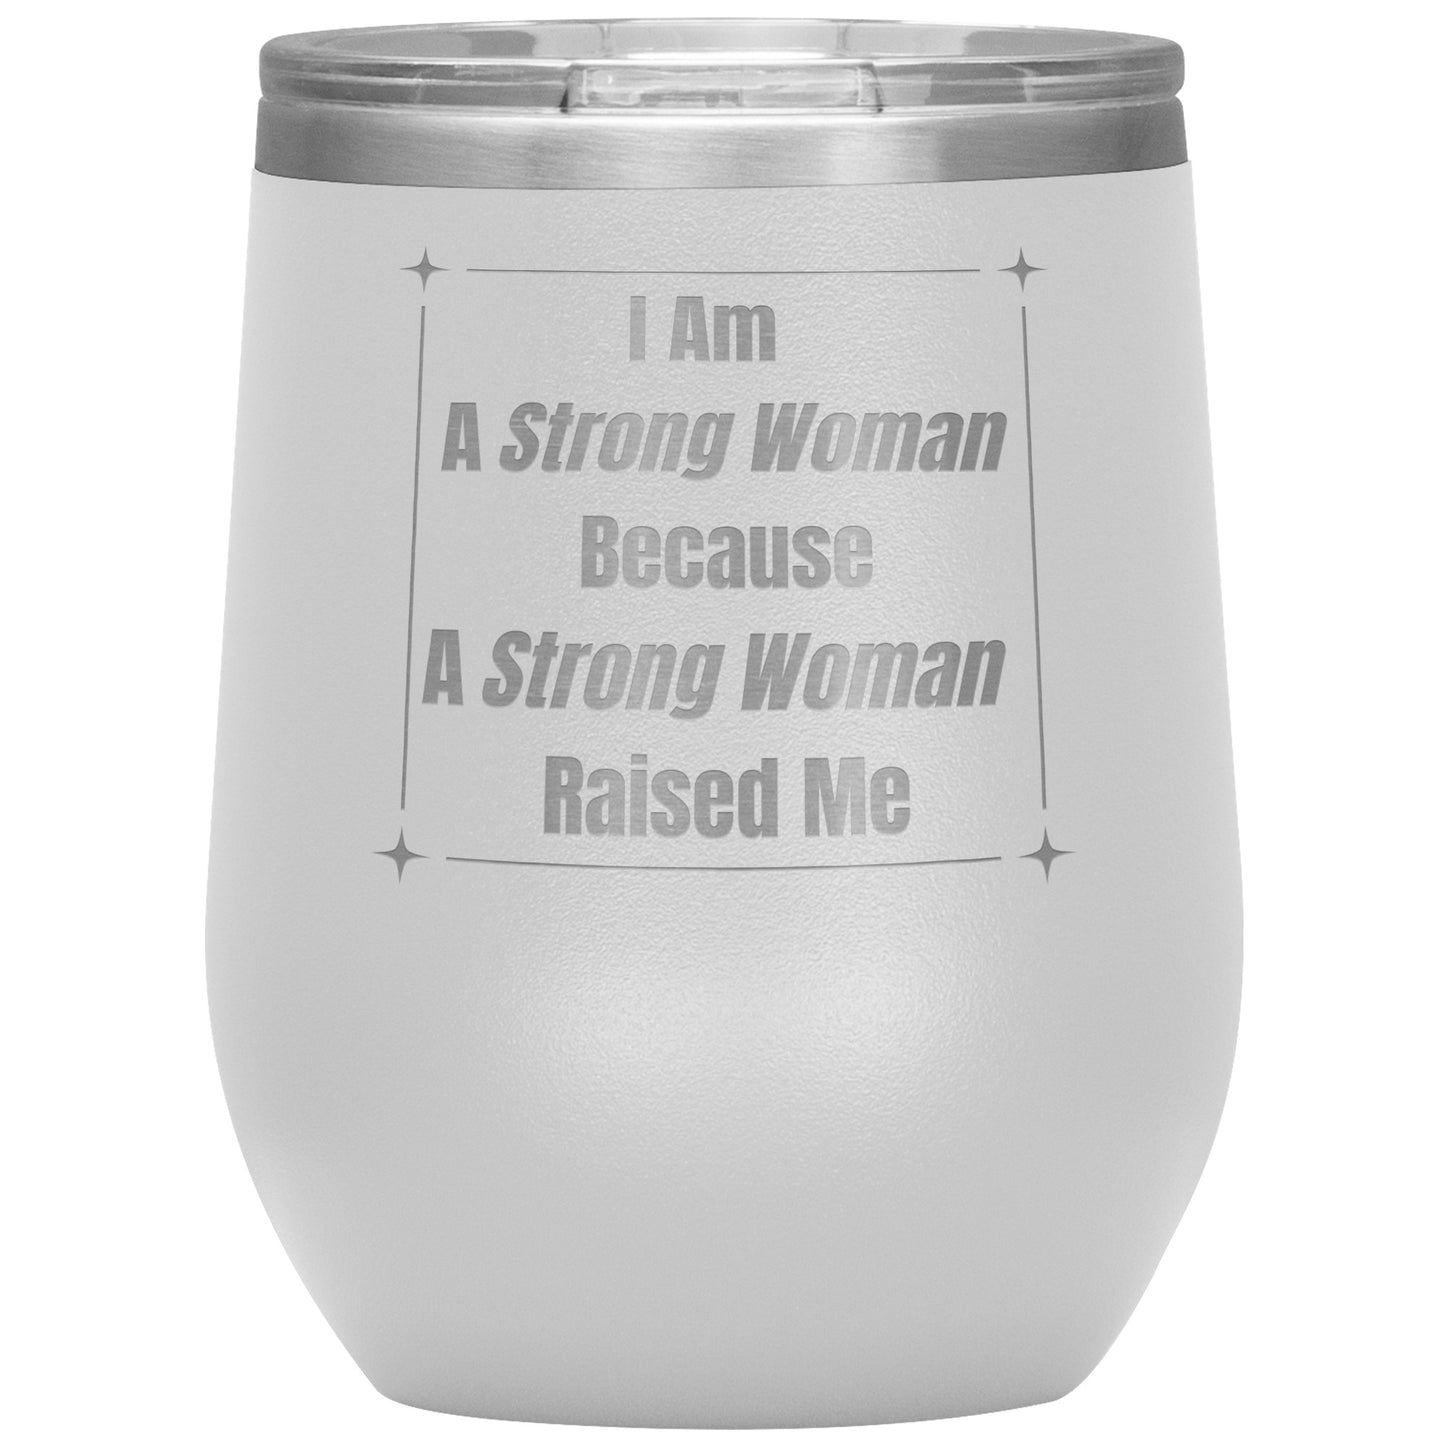 I Am a Strong Woman Because I Strong Woman Raised Me Tumbler